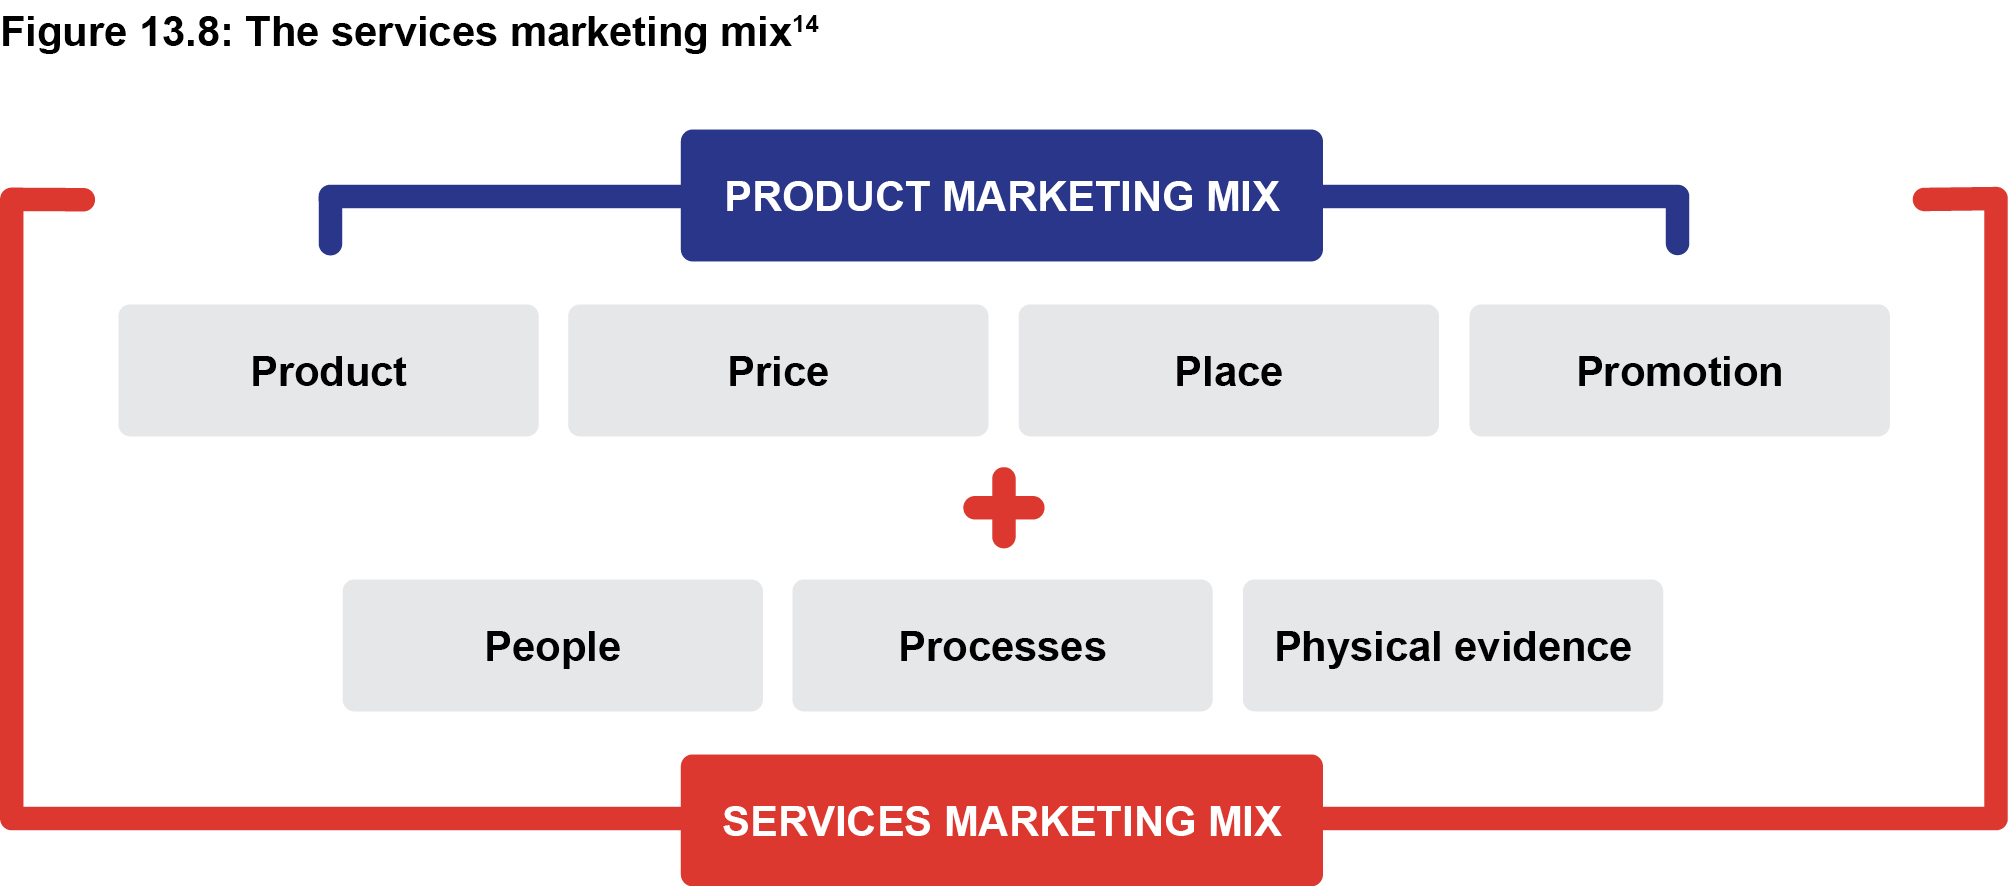 Figure 13.8: The services marketing mix